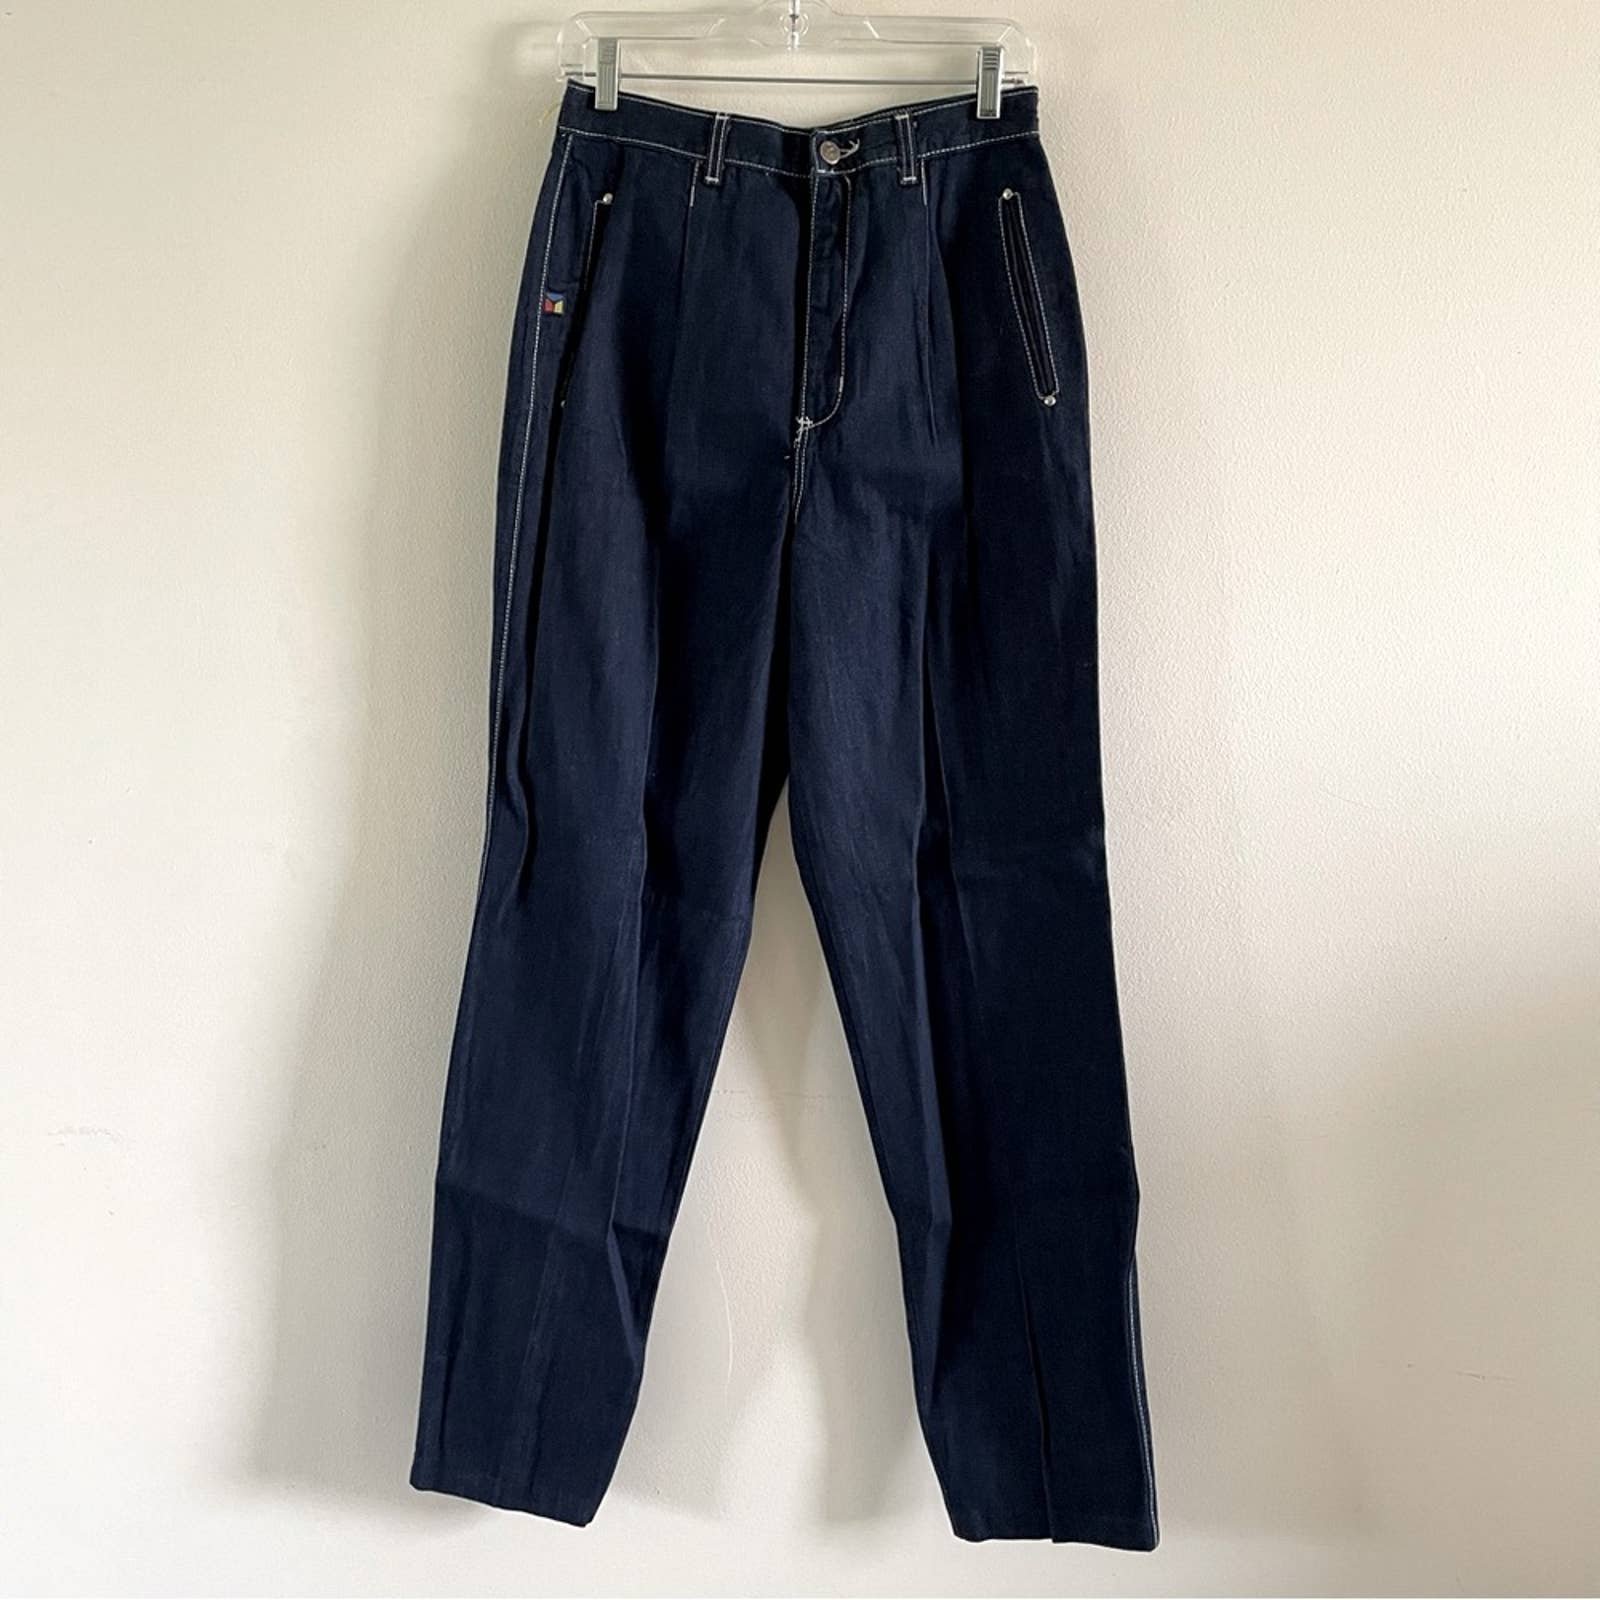 Popular Bonjour Vintage 80s Jeans Size Small High Rise Straight Leg New With Tags Pm07vKPCK all for you